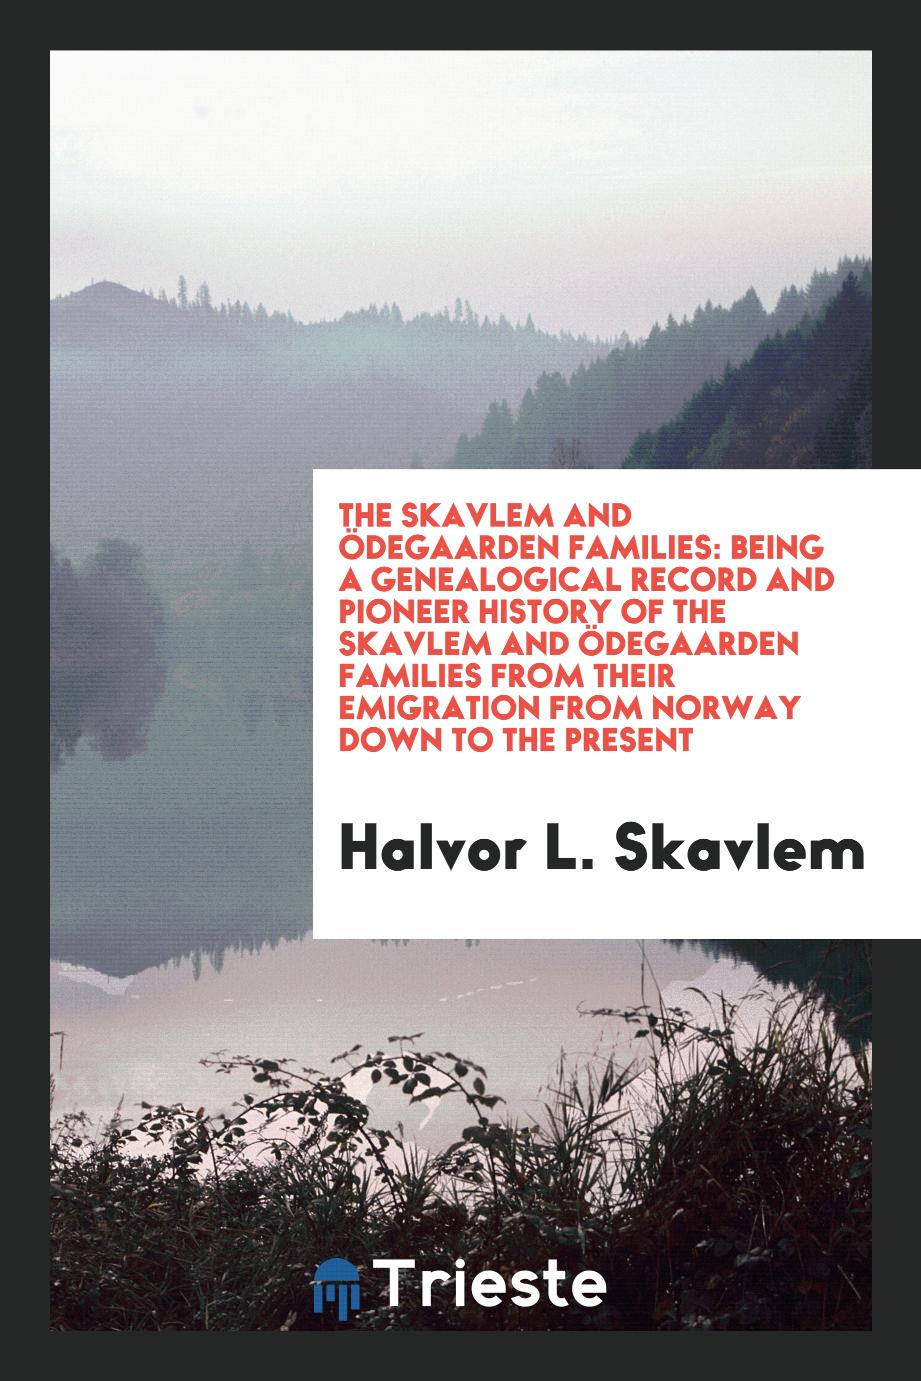 The Skavlem and ÖDegaarden Families: Being a Genealogical Record and Pioneer History of the Skavlem and ÖDegaarden Families from Their Emigration from Norway down to the Present